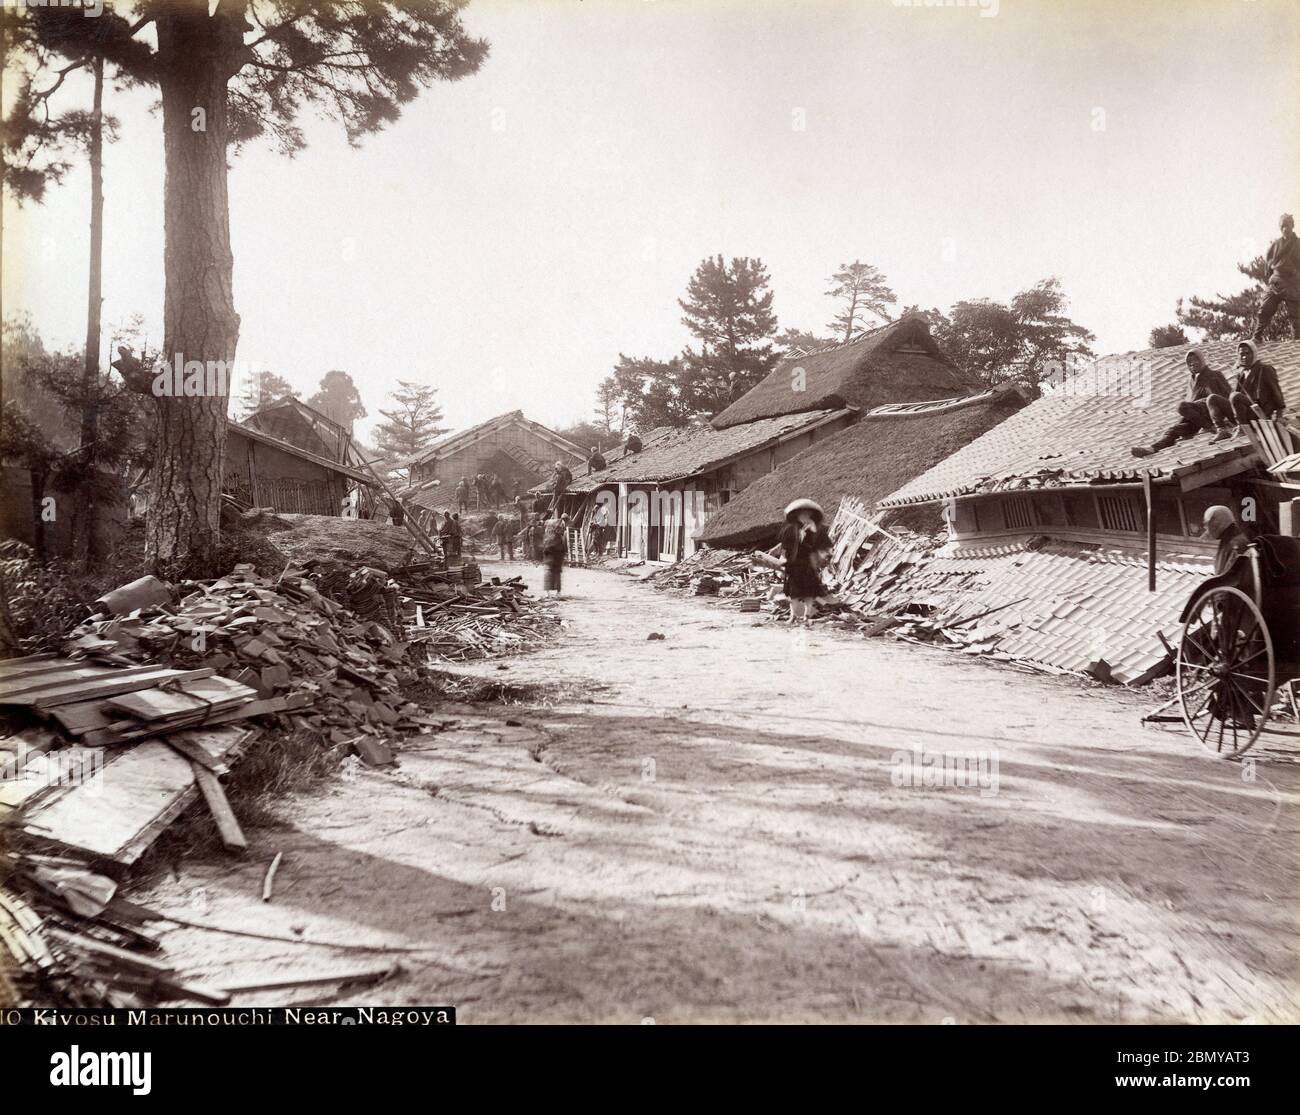 [ 1890s Japan - Nobi Earthquake ] —   A road with homes devastated by the Nobi Earthquake (濃尾地震, Nobi Jishin) of October 28, 1891 (Meiji 24).  The Nobi Earthquake measured between 8.0 and 8.4 on the scale of Richter and caused 7,273 deaths, 17,175 casualties and the destruction of 142,177 homes.  The caption identifies the location as Kiyosu Marunouchi (清須丸ノ内) near Nagoya in Aichi Prefecture.  19th century vintage albumen photograph. Stock Photo